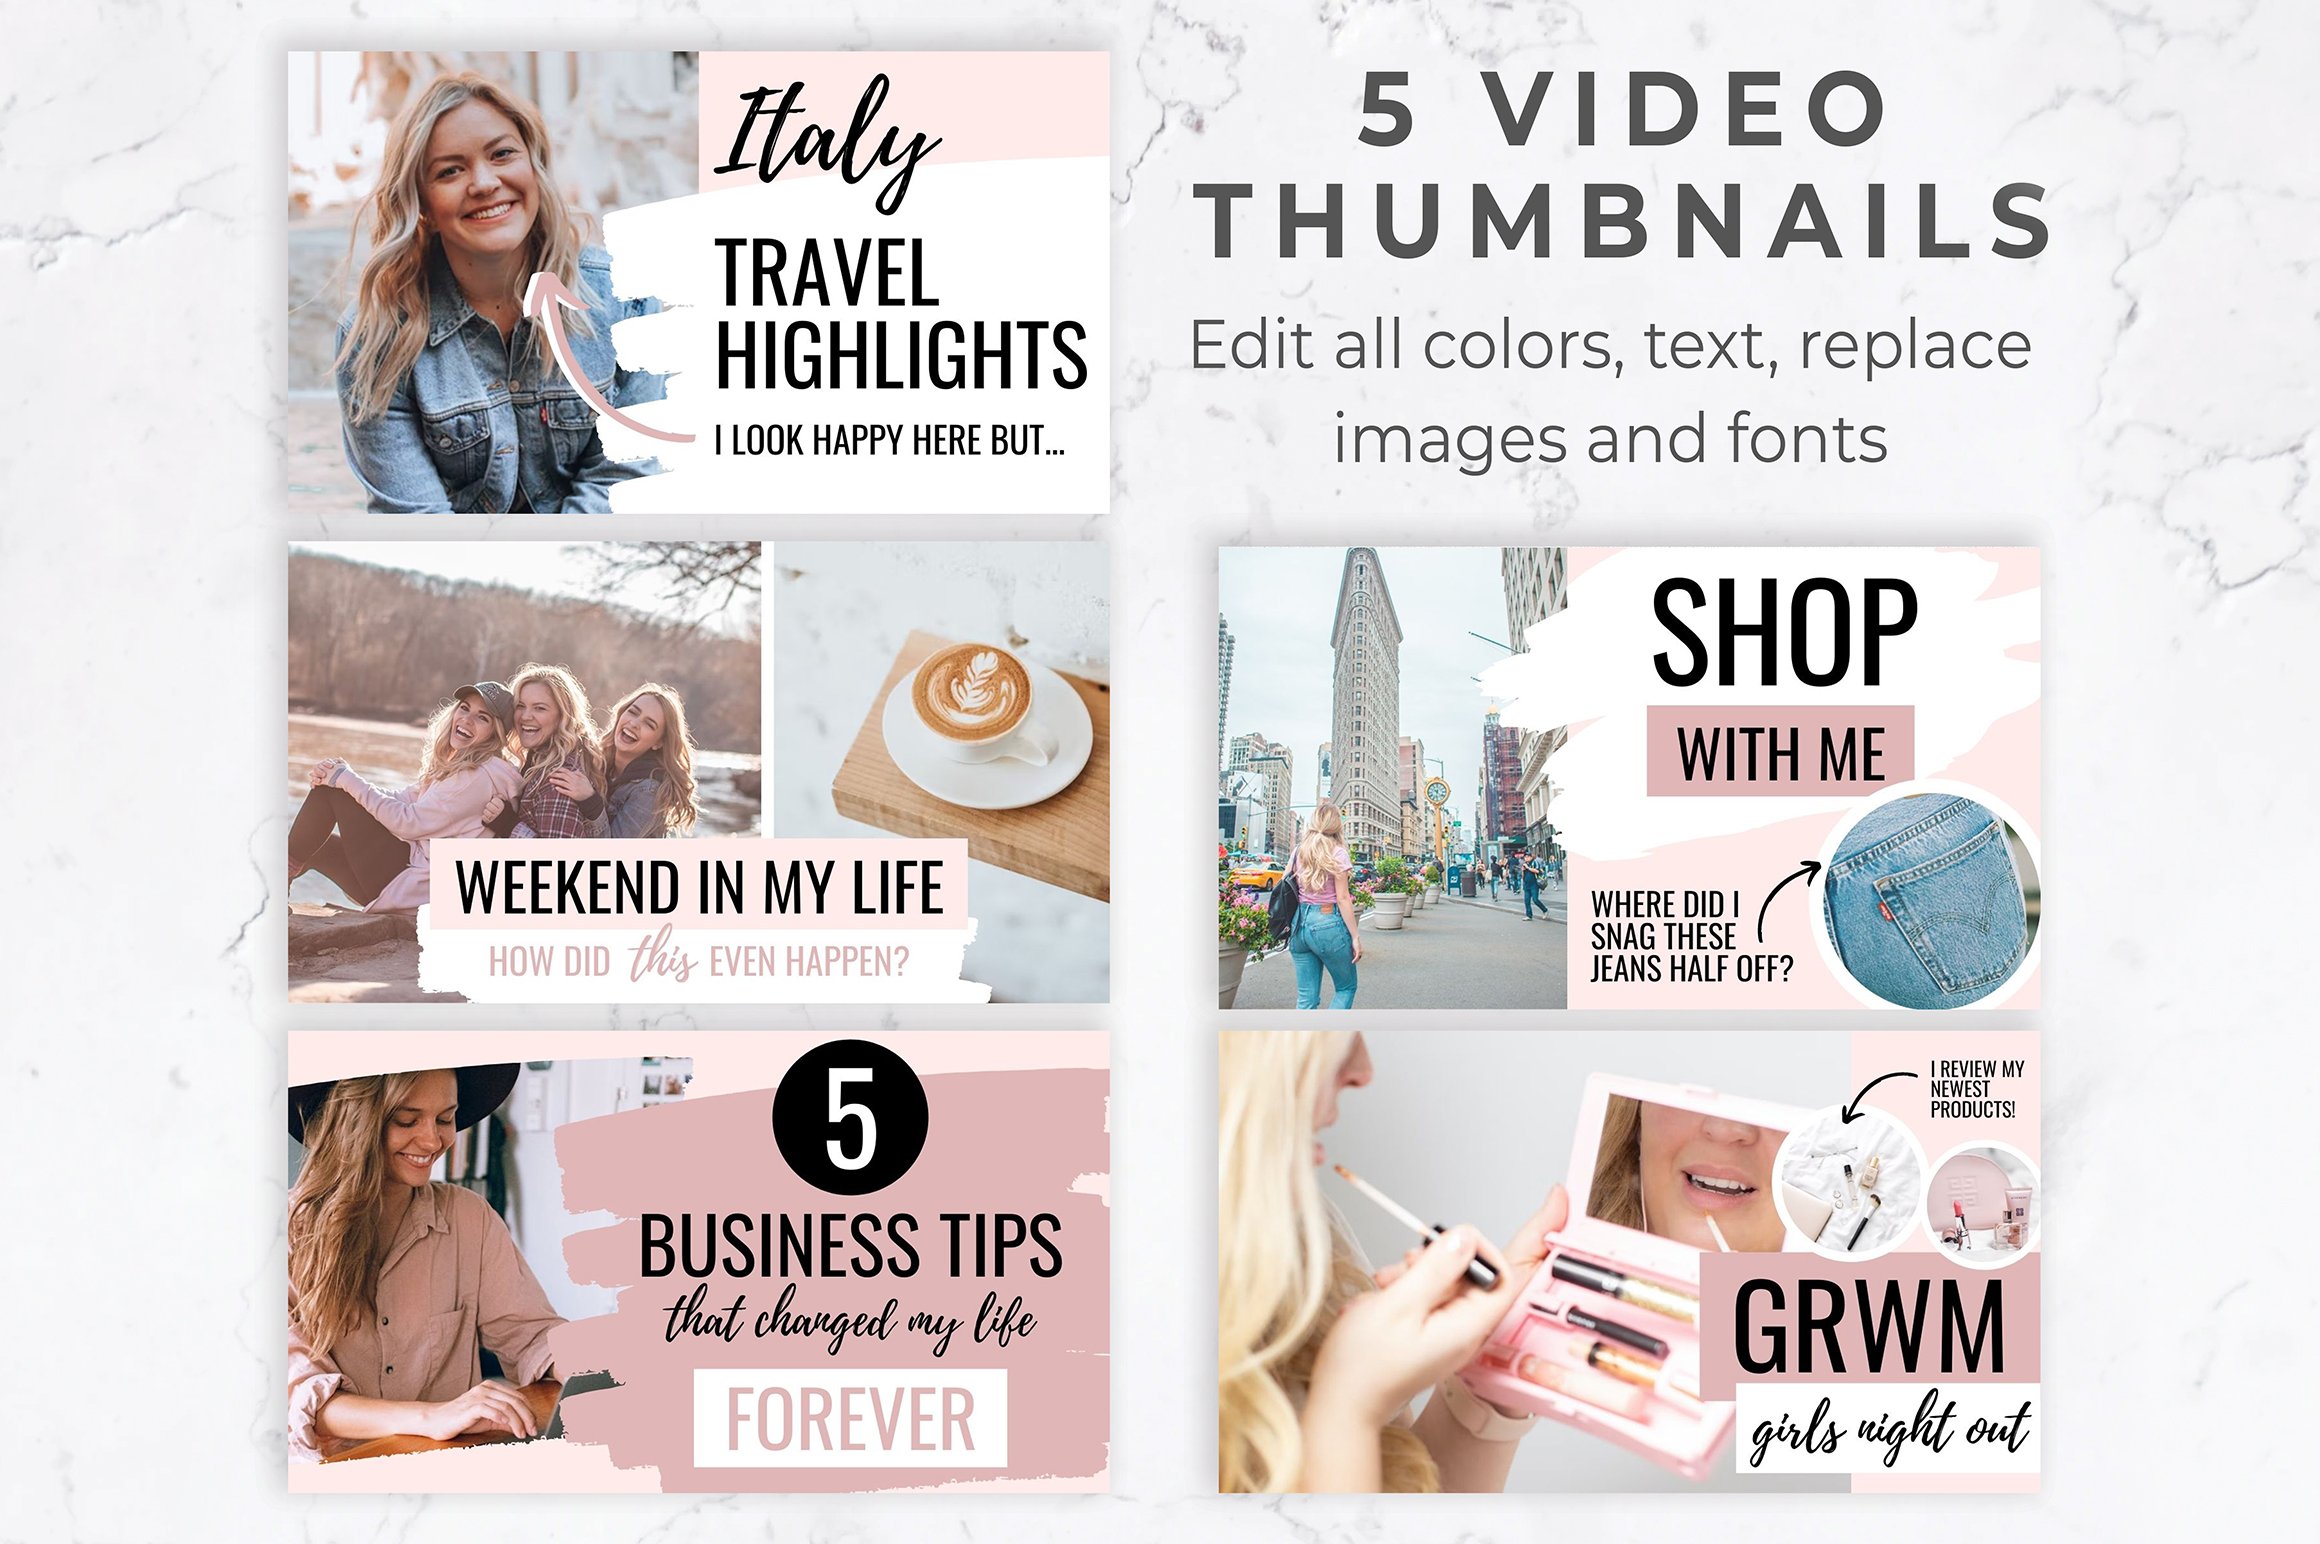 Cool grey and pink colors mix for your youtube channel.